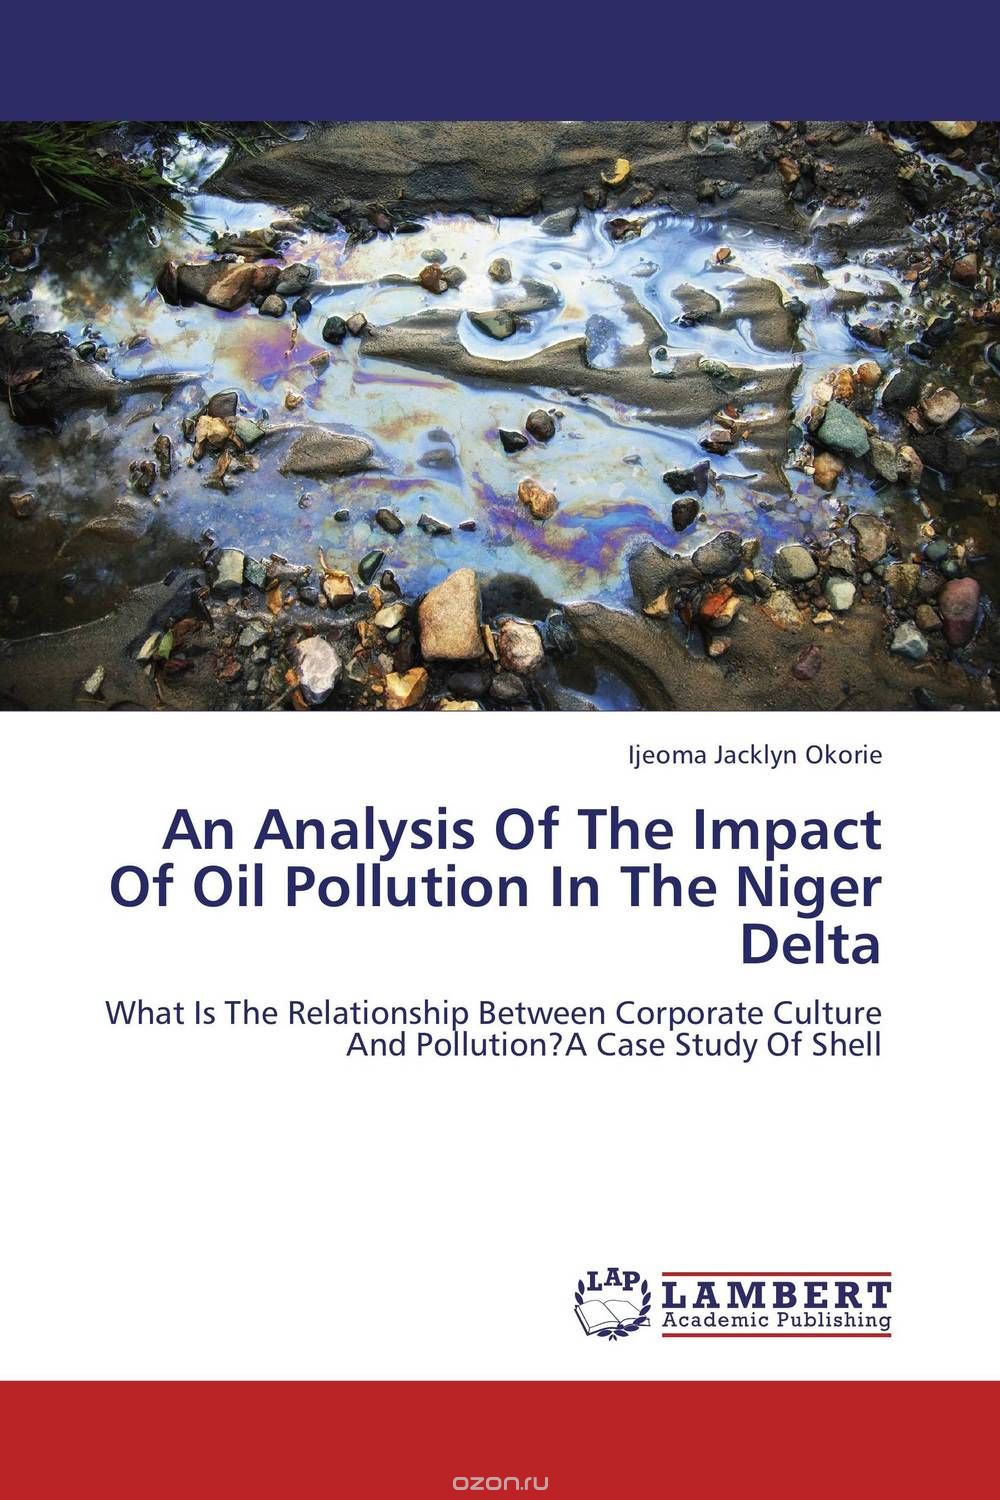 Скачать книгу "An Analysis Of The Impact Of Oil Pollution In The Niger Delta"